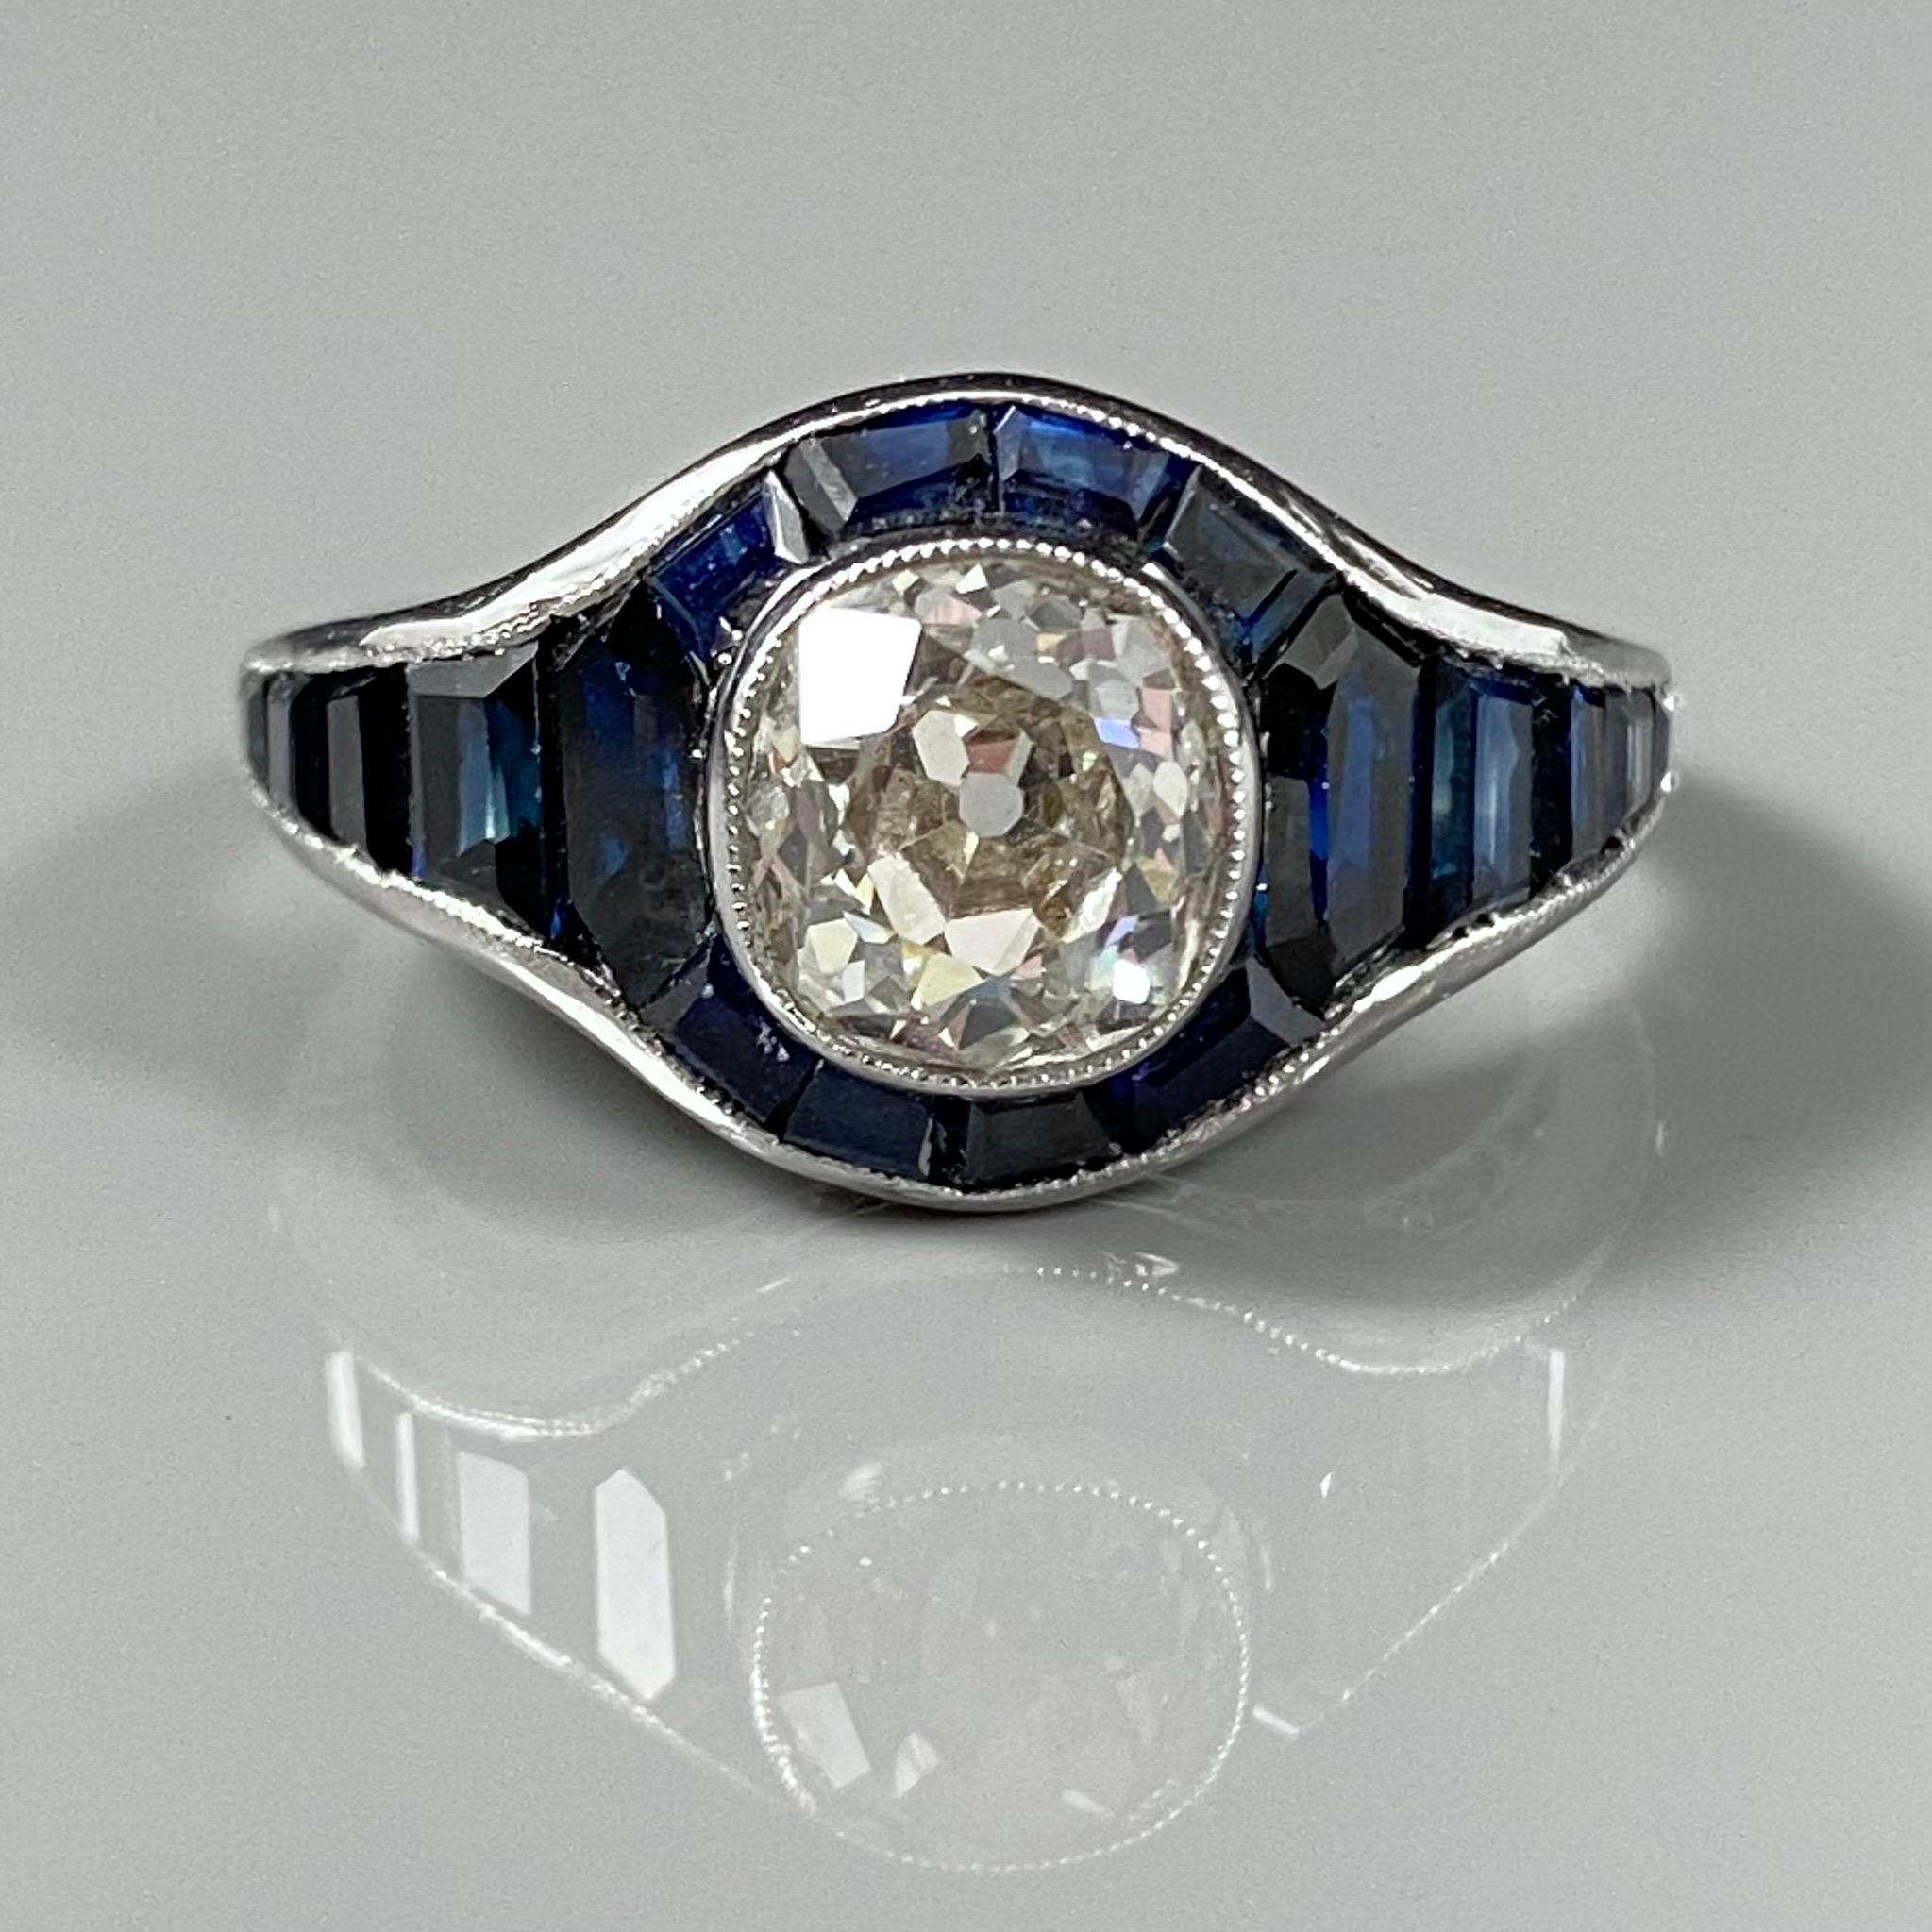 Art Deco style 1.80-carat Old Mine-cut diamond and sapphire engagement ring in platinum, vintage from circa 1990. This jewel of bombé cluster design features a charming Old Mine-cut diamond millegrain-set to the center, surrounded by a halo of